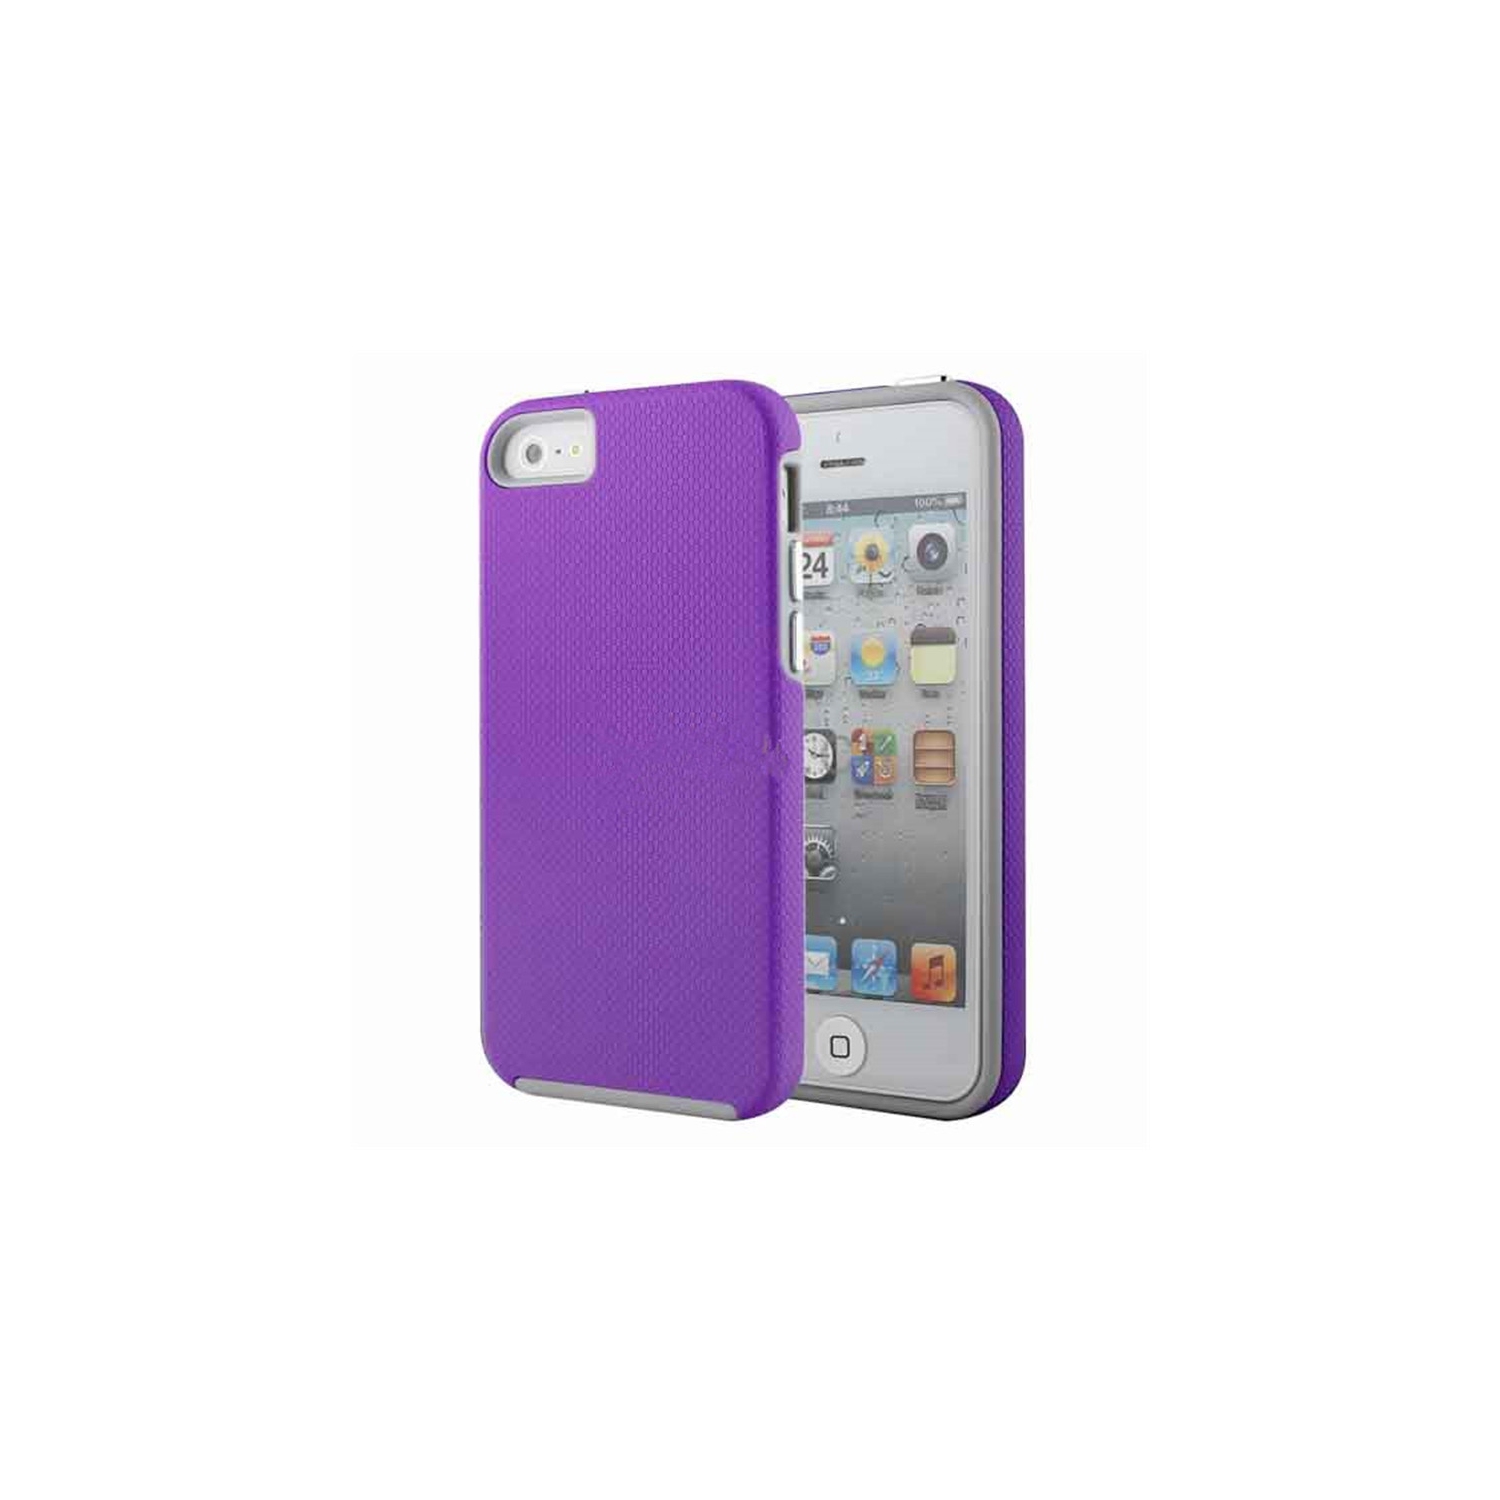 【CSmart】 Slim Fitted Hybrid Hard PC Shell Shockproof Scratch Resistant Case Cover for iPhone 5 / 5S / SE, Purple